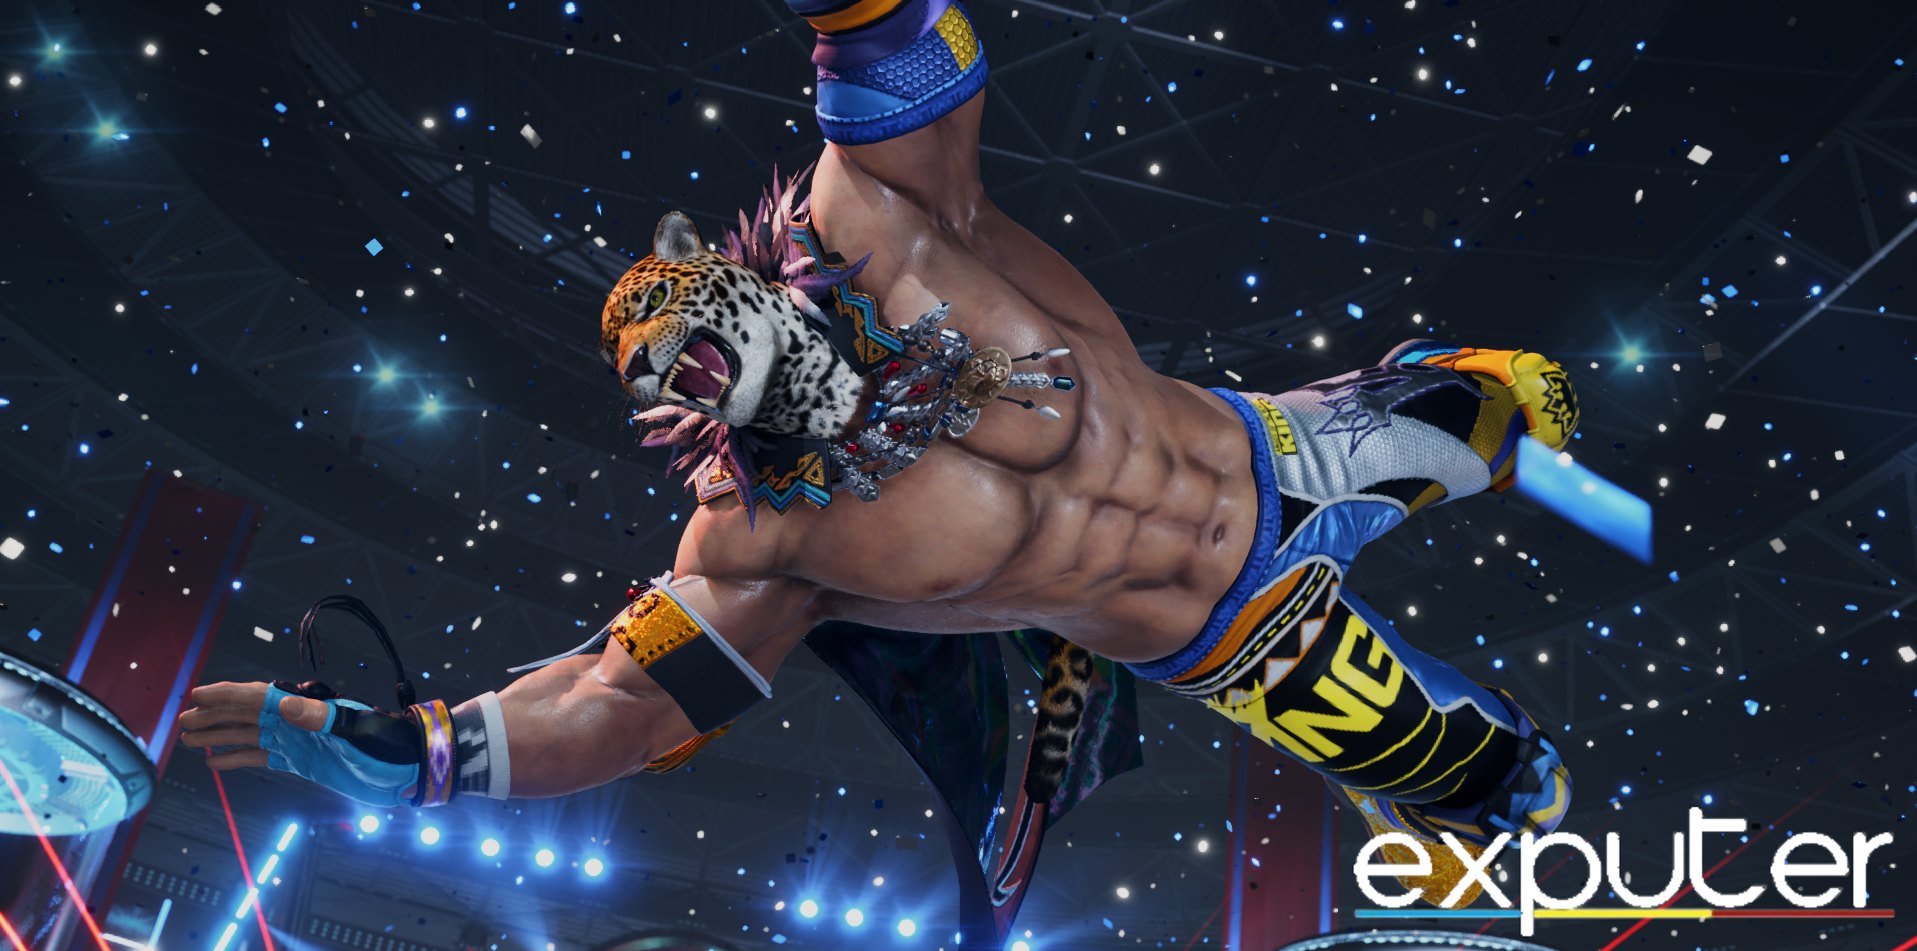 King in the wrestling ring intro in Tekken 8. (image captured by eXputer)